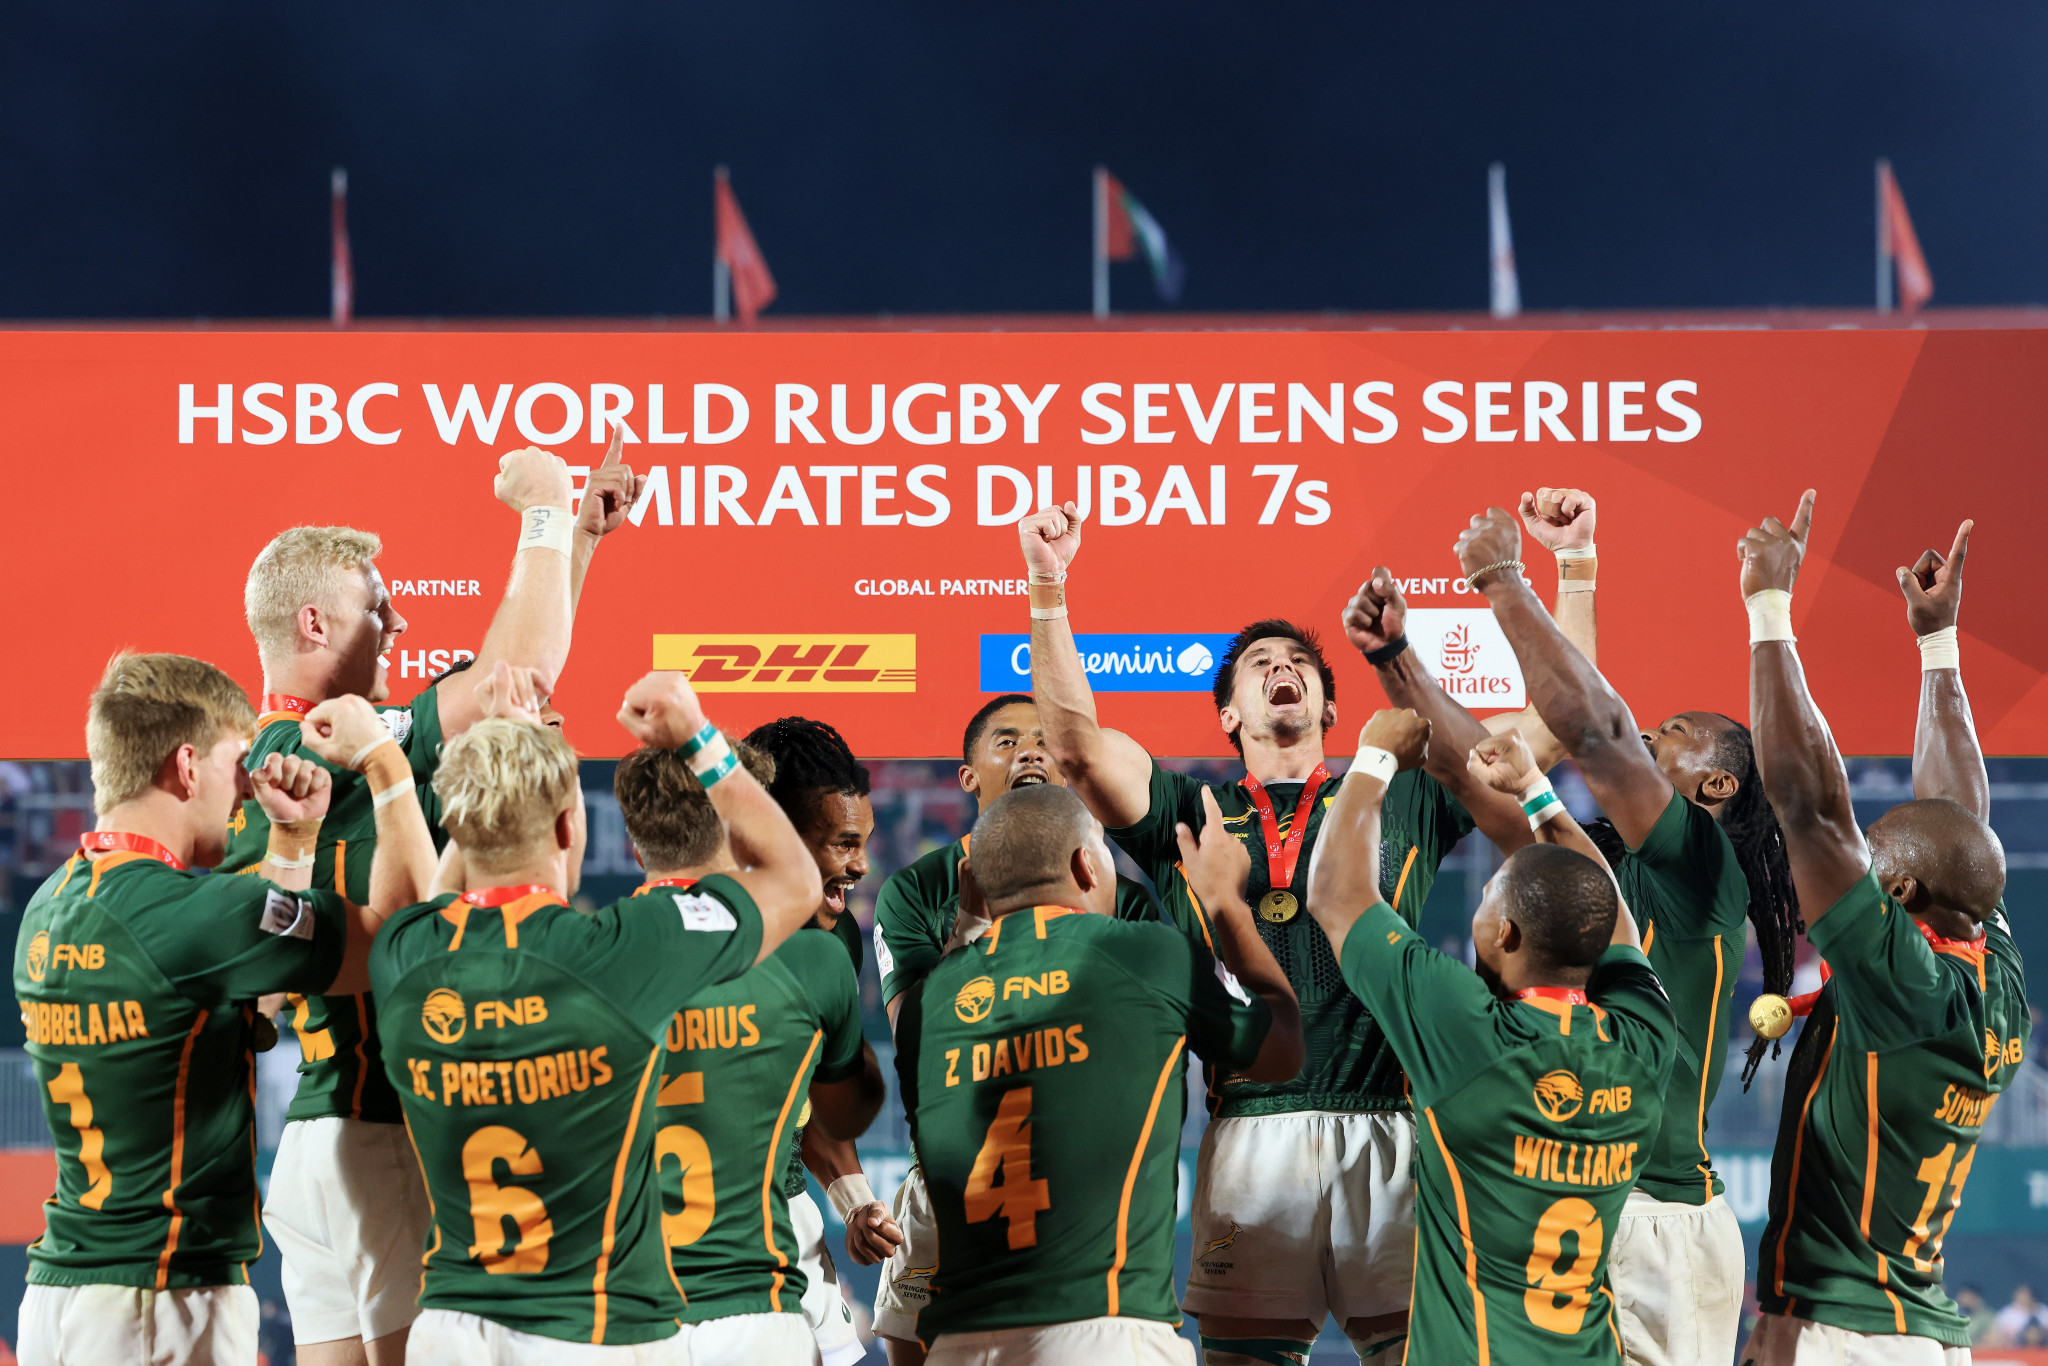 South Africa have won both of the men's World Rugby Sevens Series tournaments in 2021-2022 ©Getty Images